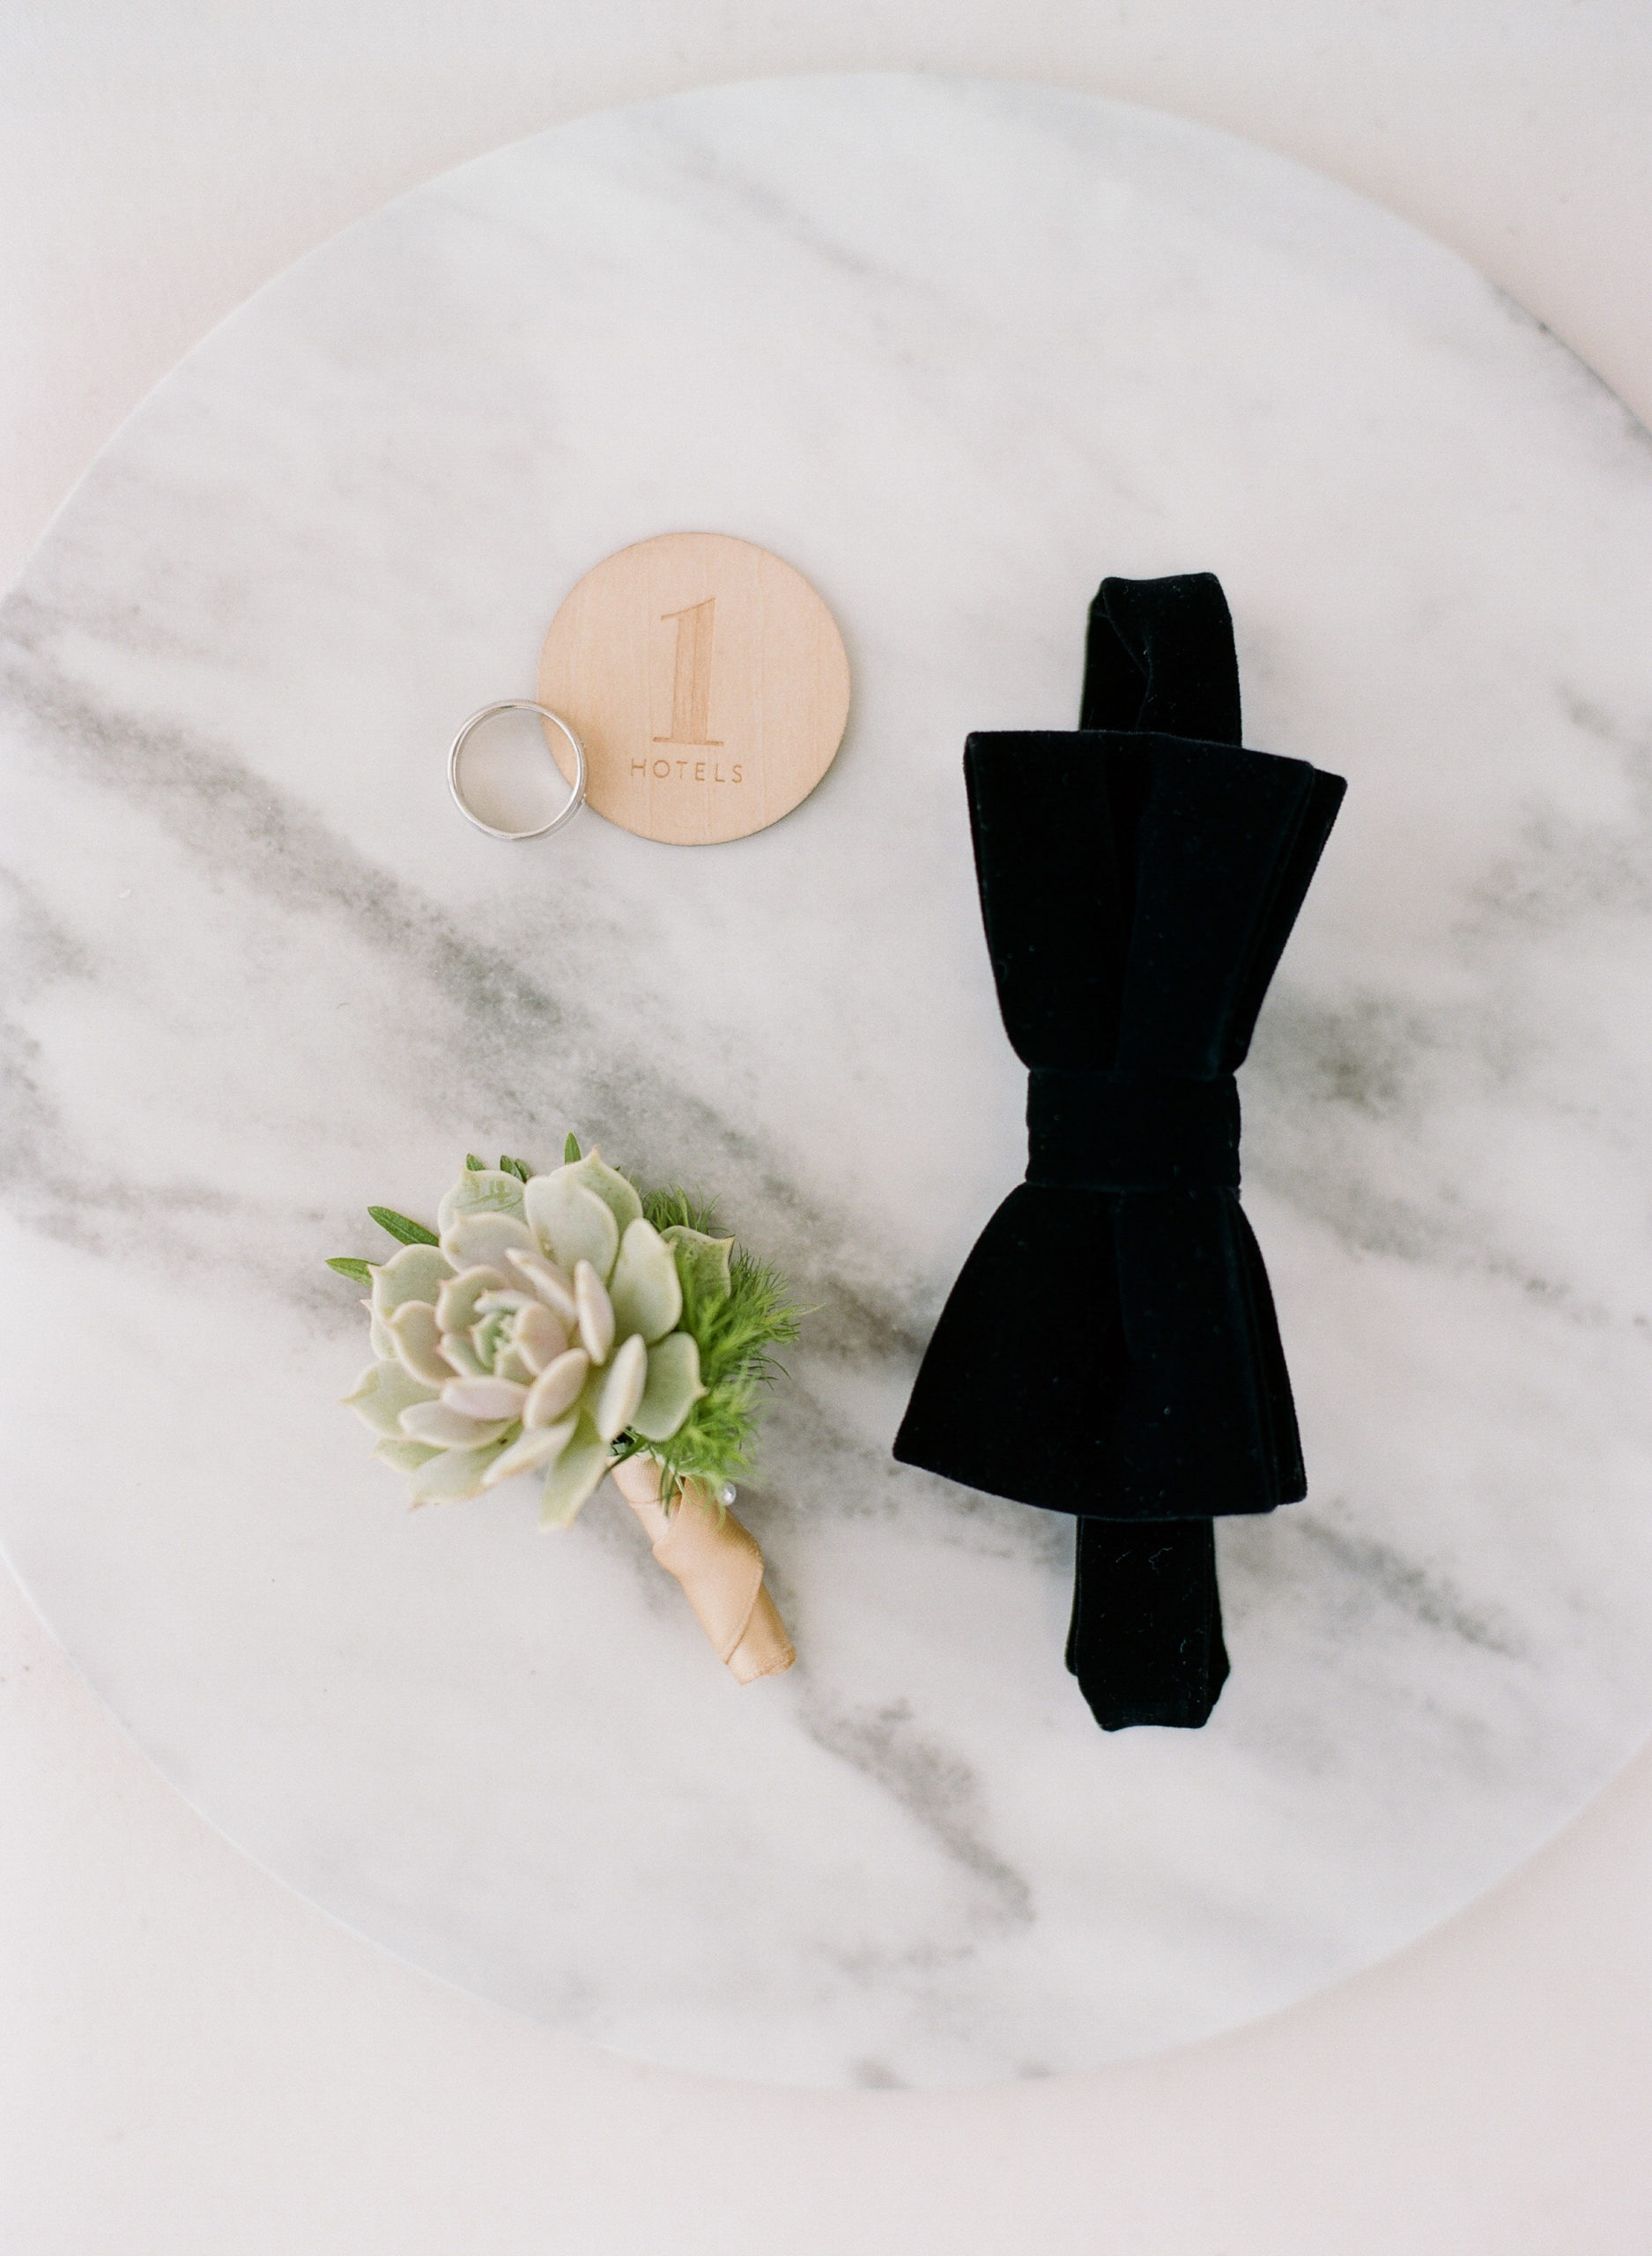 A succulent boutonnière and black velvet tie from Satori Amici were the perfect compliments to the 1 Hotel Room South Beach room key